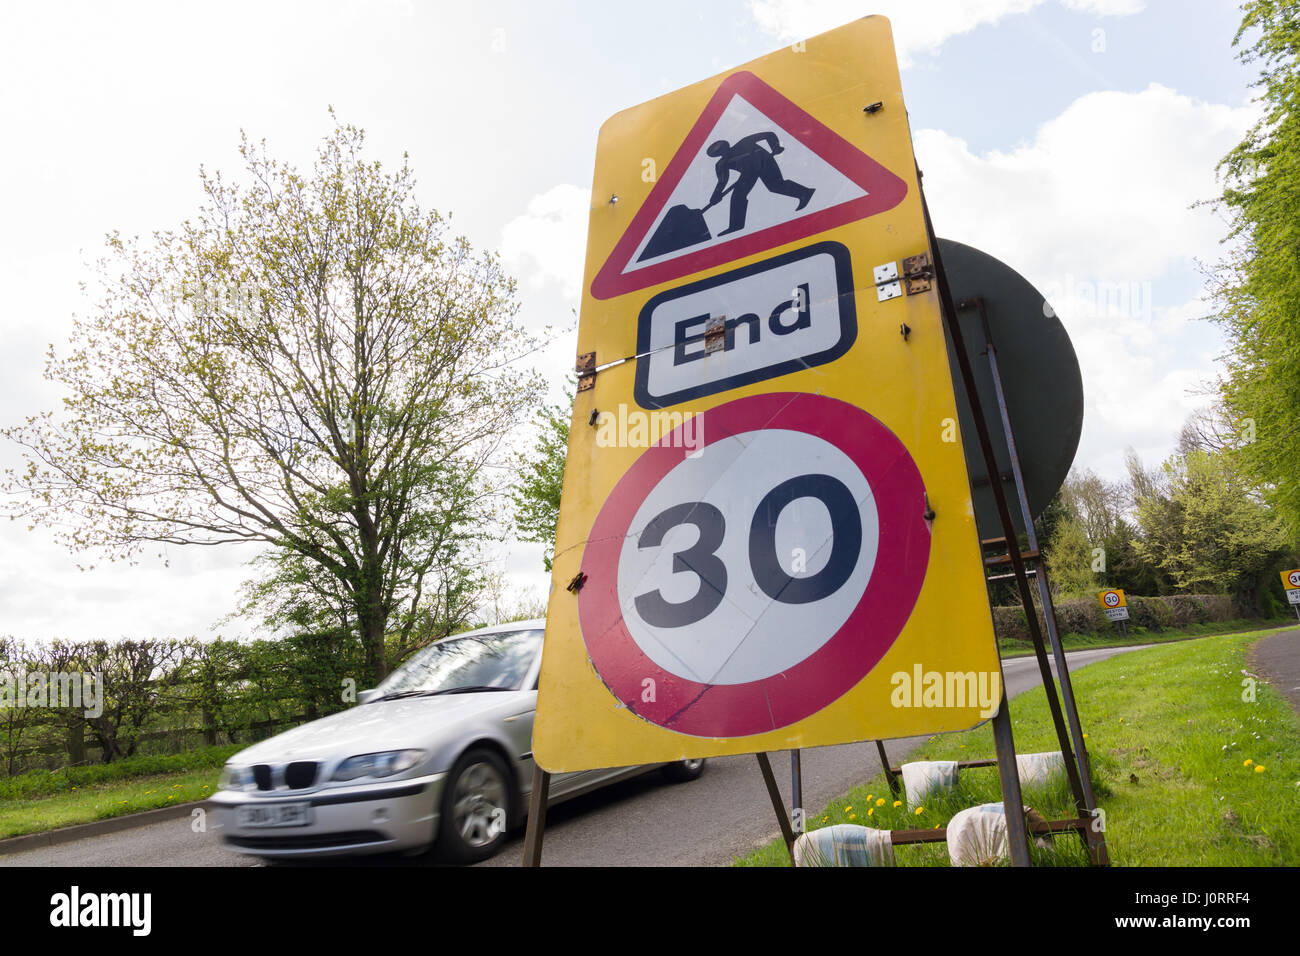 Gledrid, Shropshire, United Kingdom. 15th April, 2017. Traffic negotiates the long term safety works on the the roundabout in Gledrid on the A5 / A483 the main route from Shropshire England in to North Wales. The works have created delays and tail backs for Easter holiday traffic driving in to Wales and are due for completion in June 2017. Credit: David Pimborough/Alamy Live News. Stock Photo